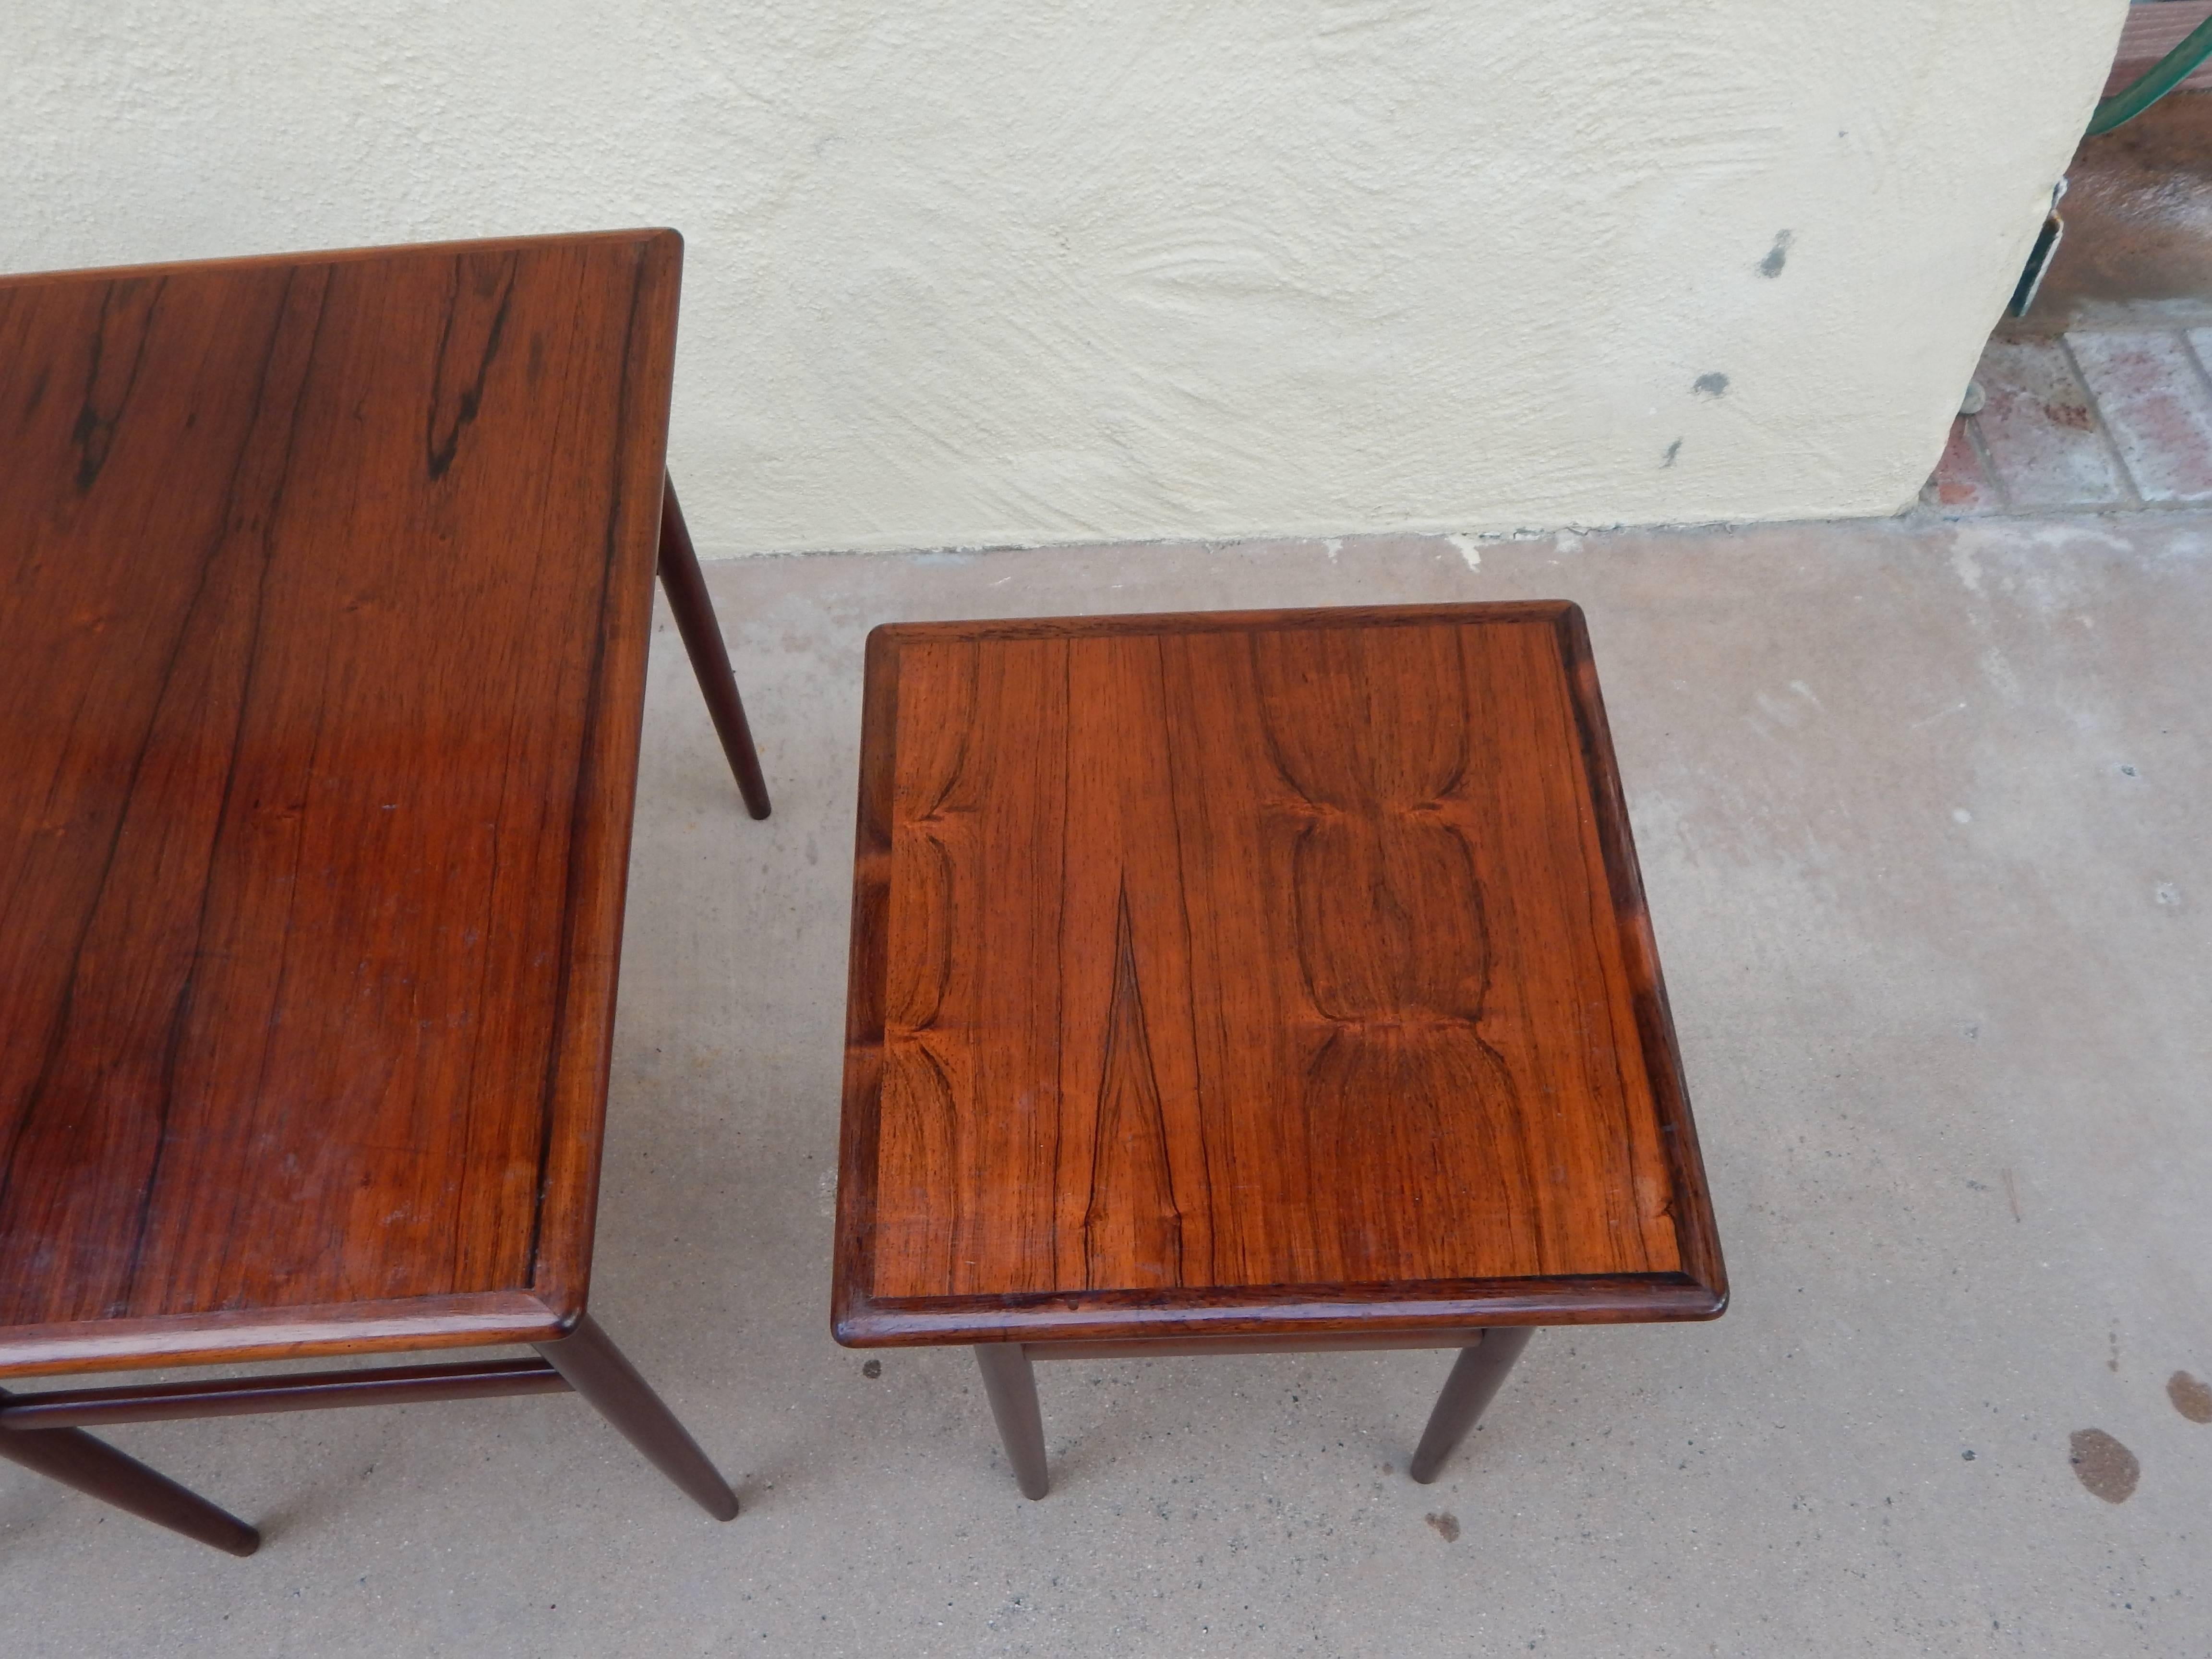 Fruitwood Set of Three Swedish Mid-Century Modern Rosewood Nesting Tables, circa 1950 For Sale